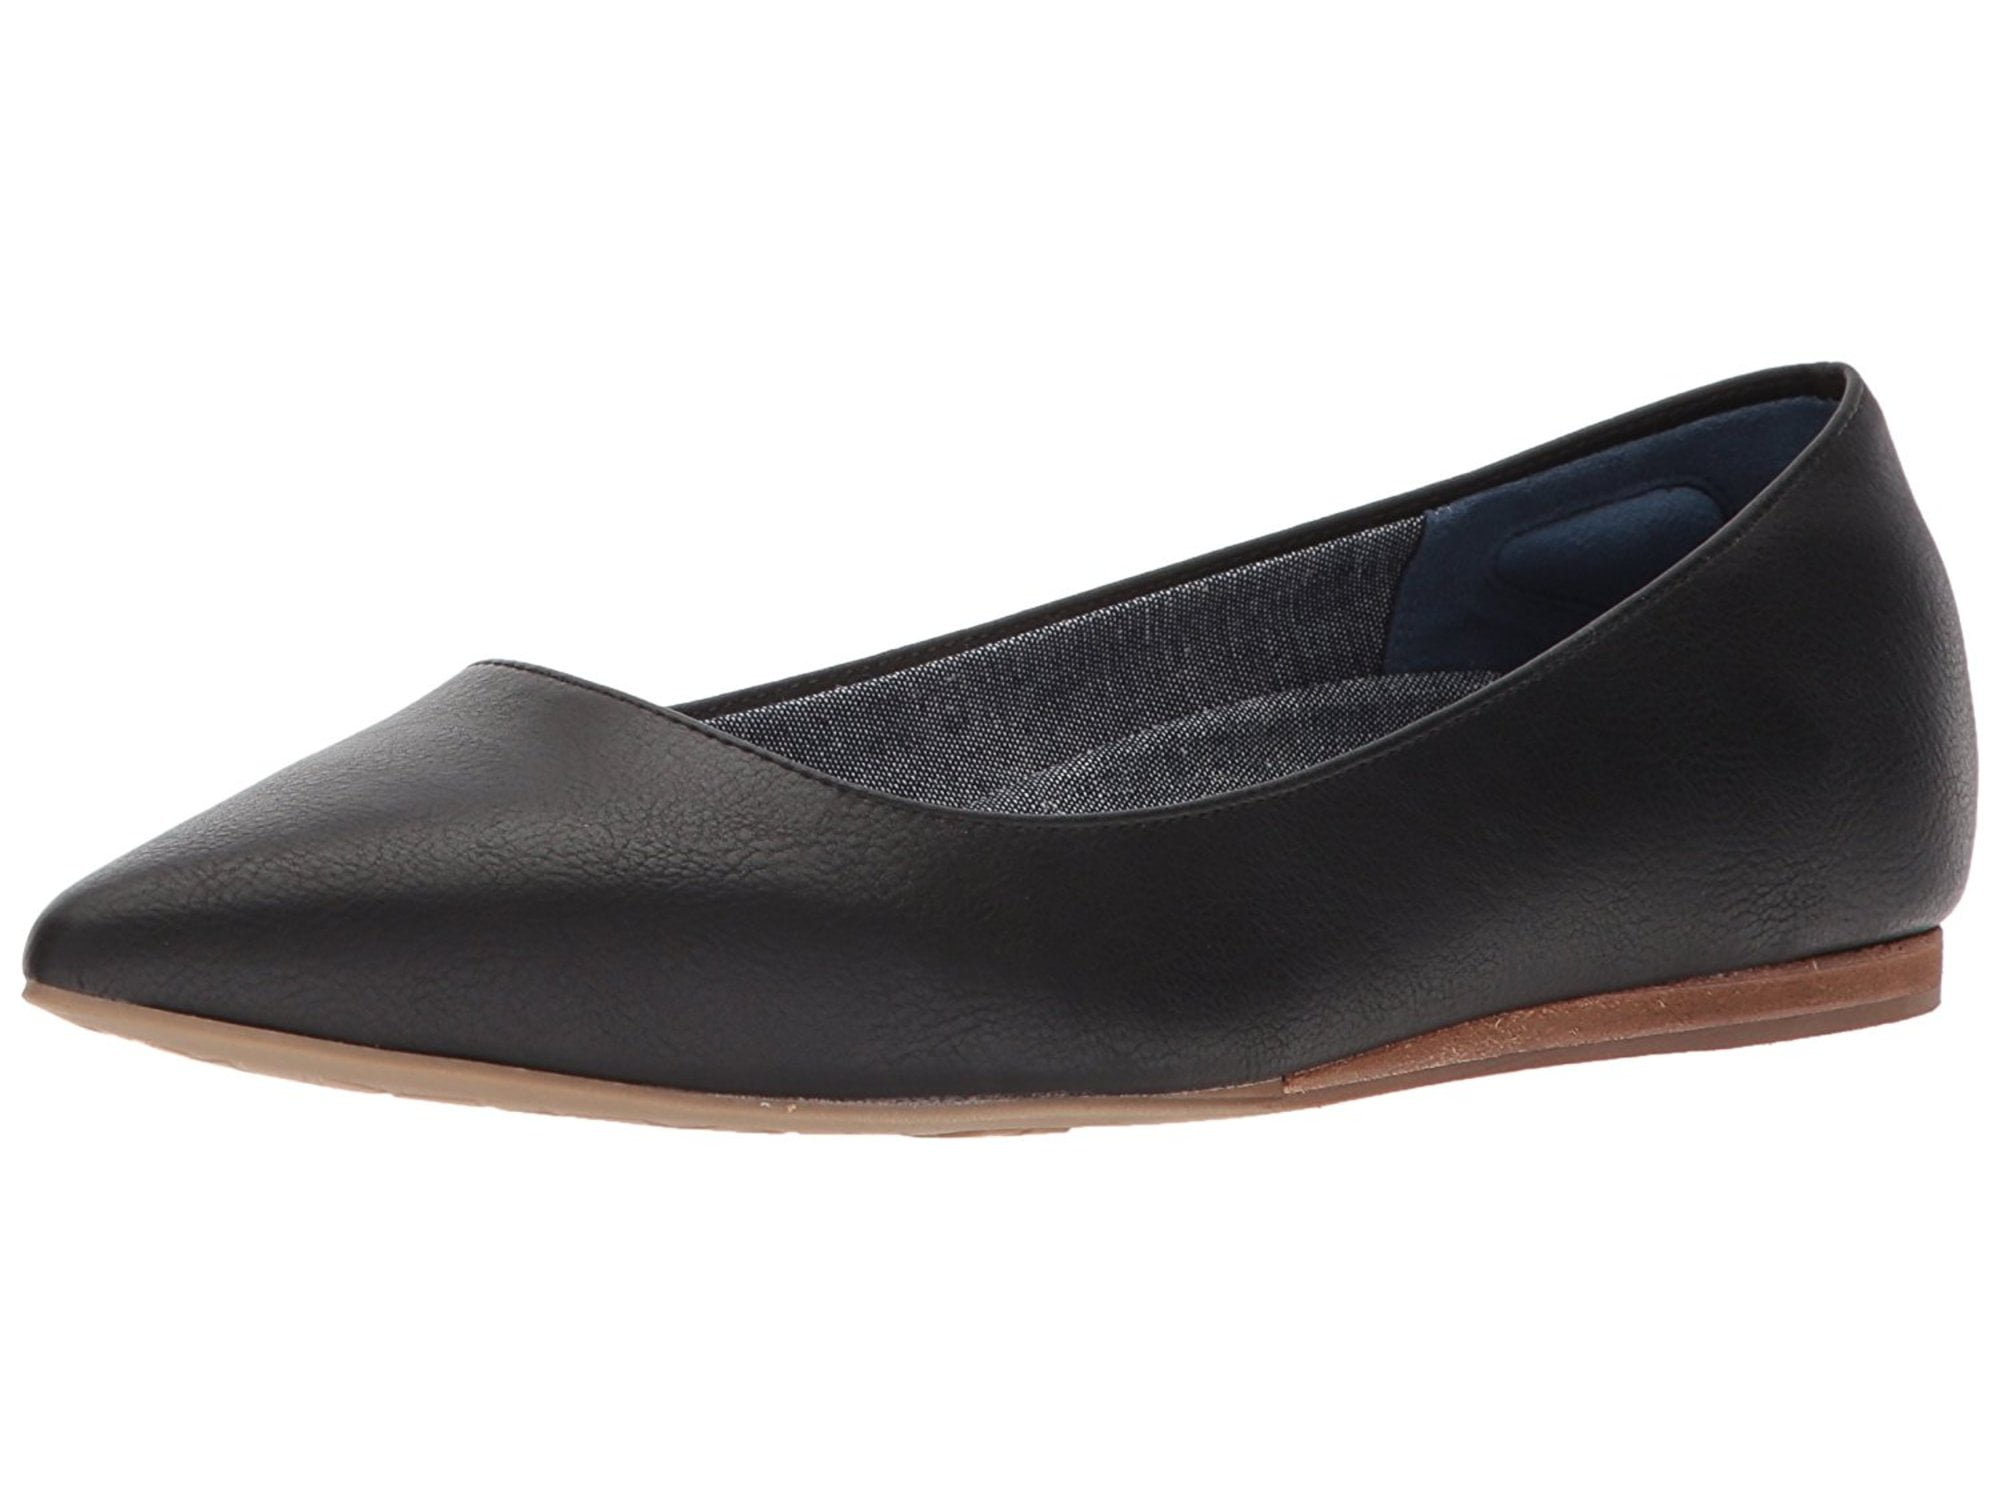 Dr. Scholl's - Dr. Scholl's Womens Leader Pointed Toe Ballet Flats ...